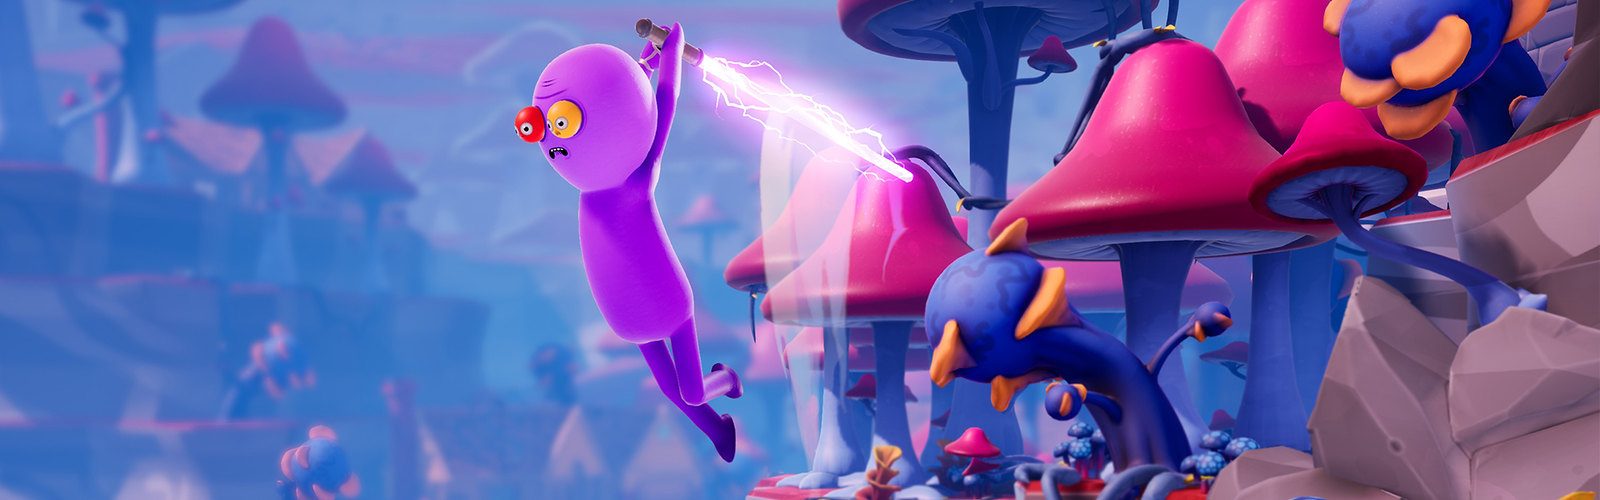 ps4 trover saves the universe